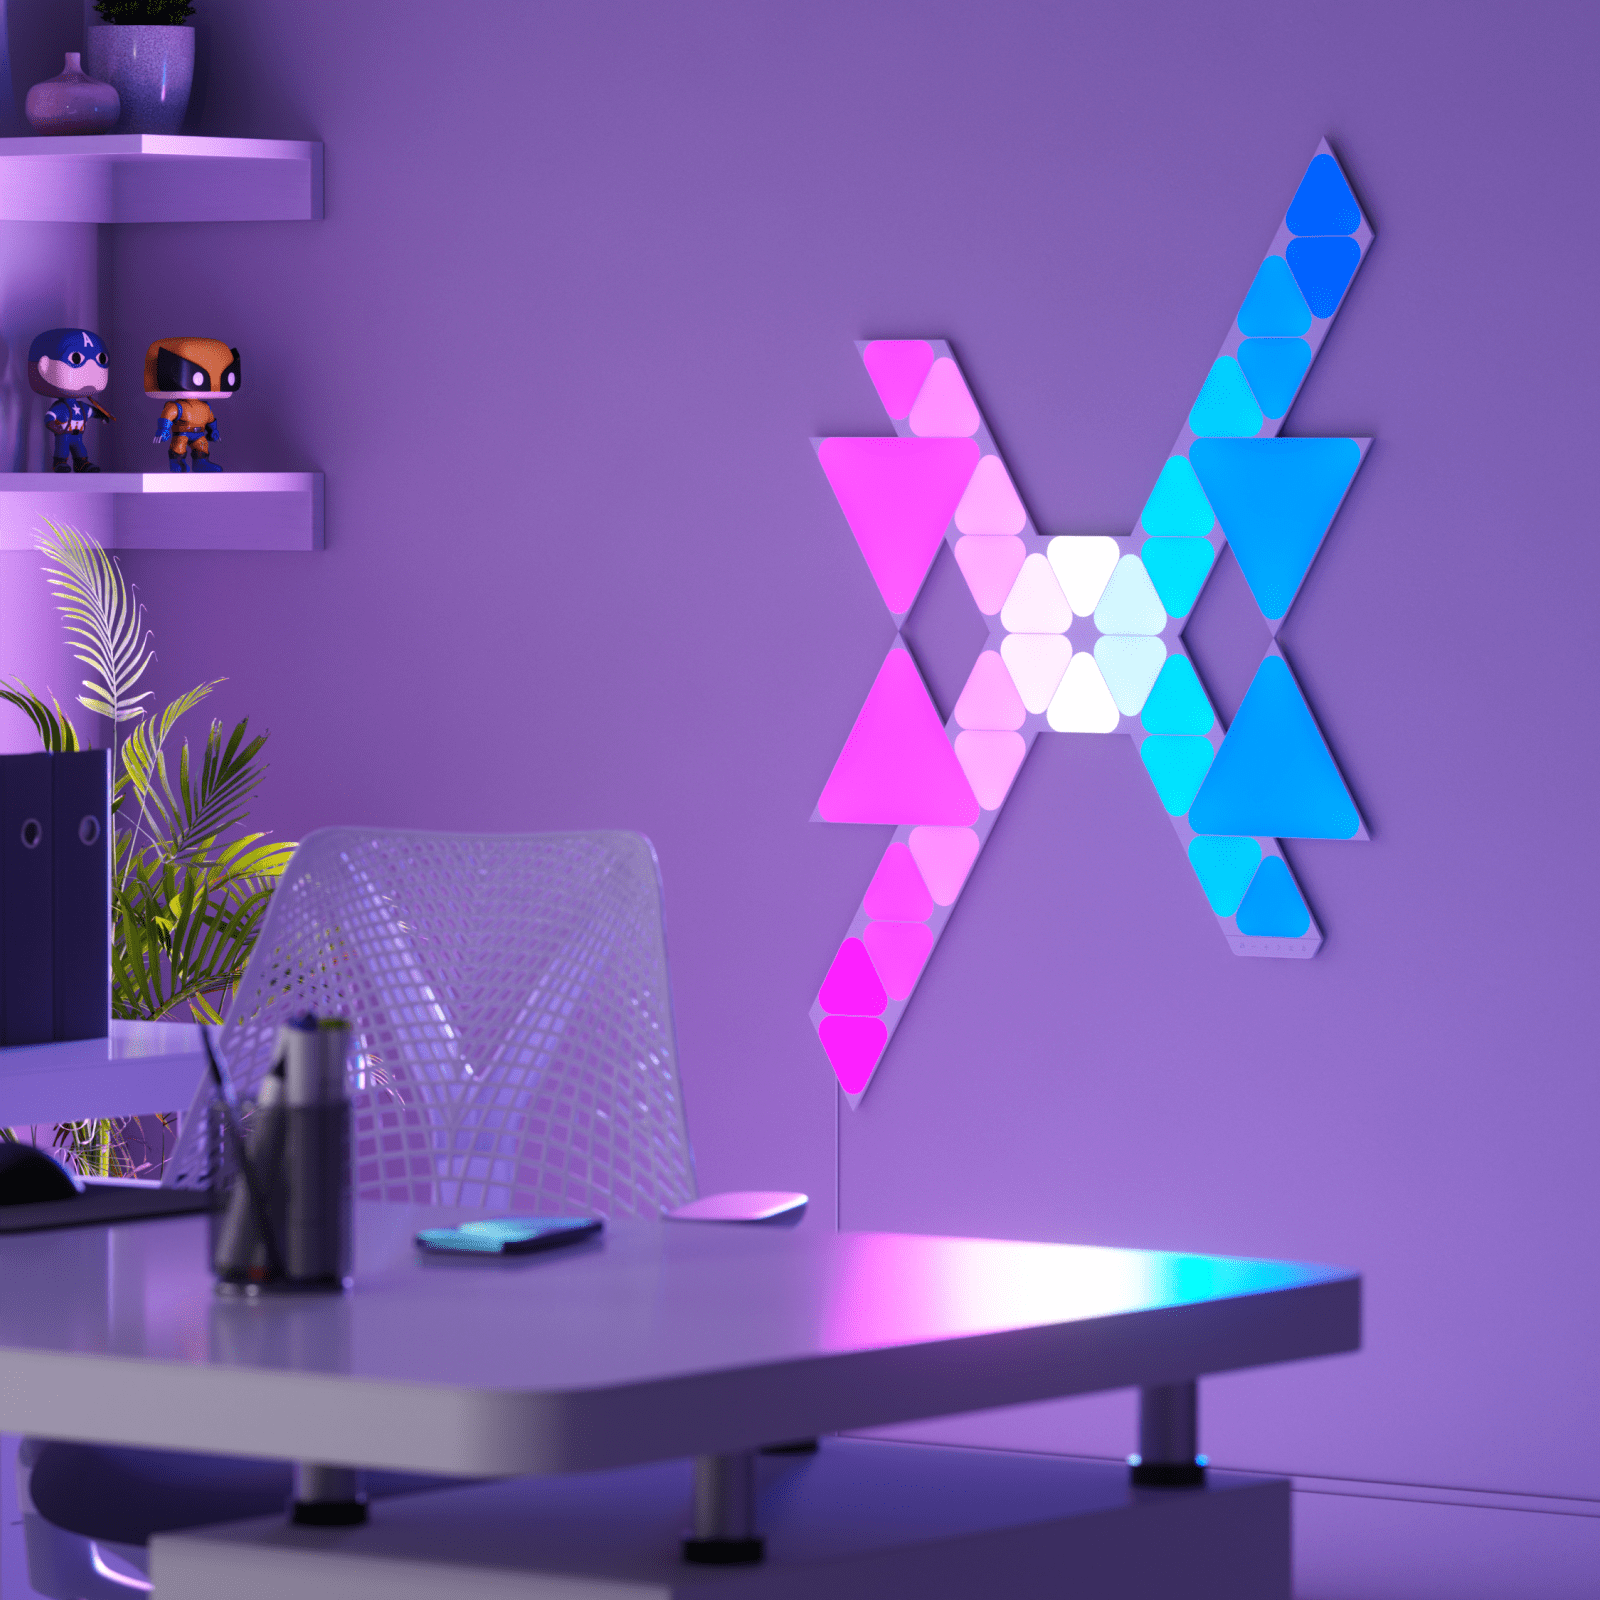 Nanoleaf Shapes Thread enabled color changing triangle and mini triangle smart modular light panels.